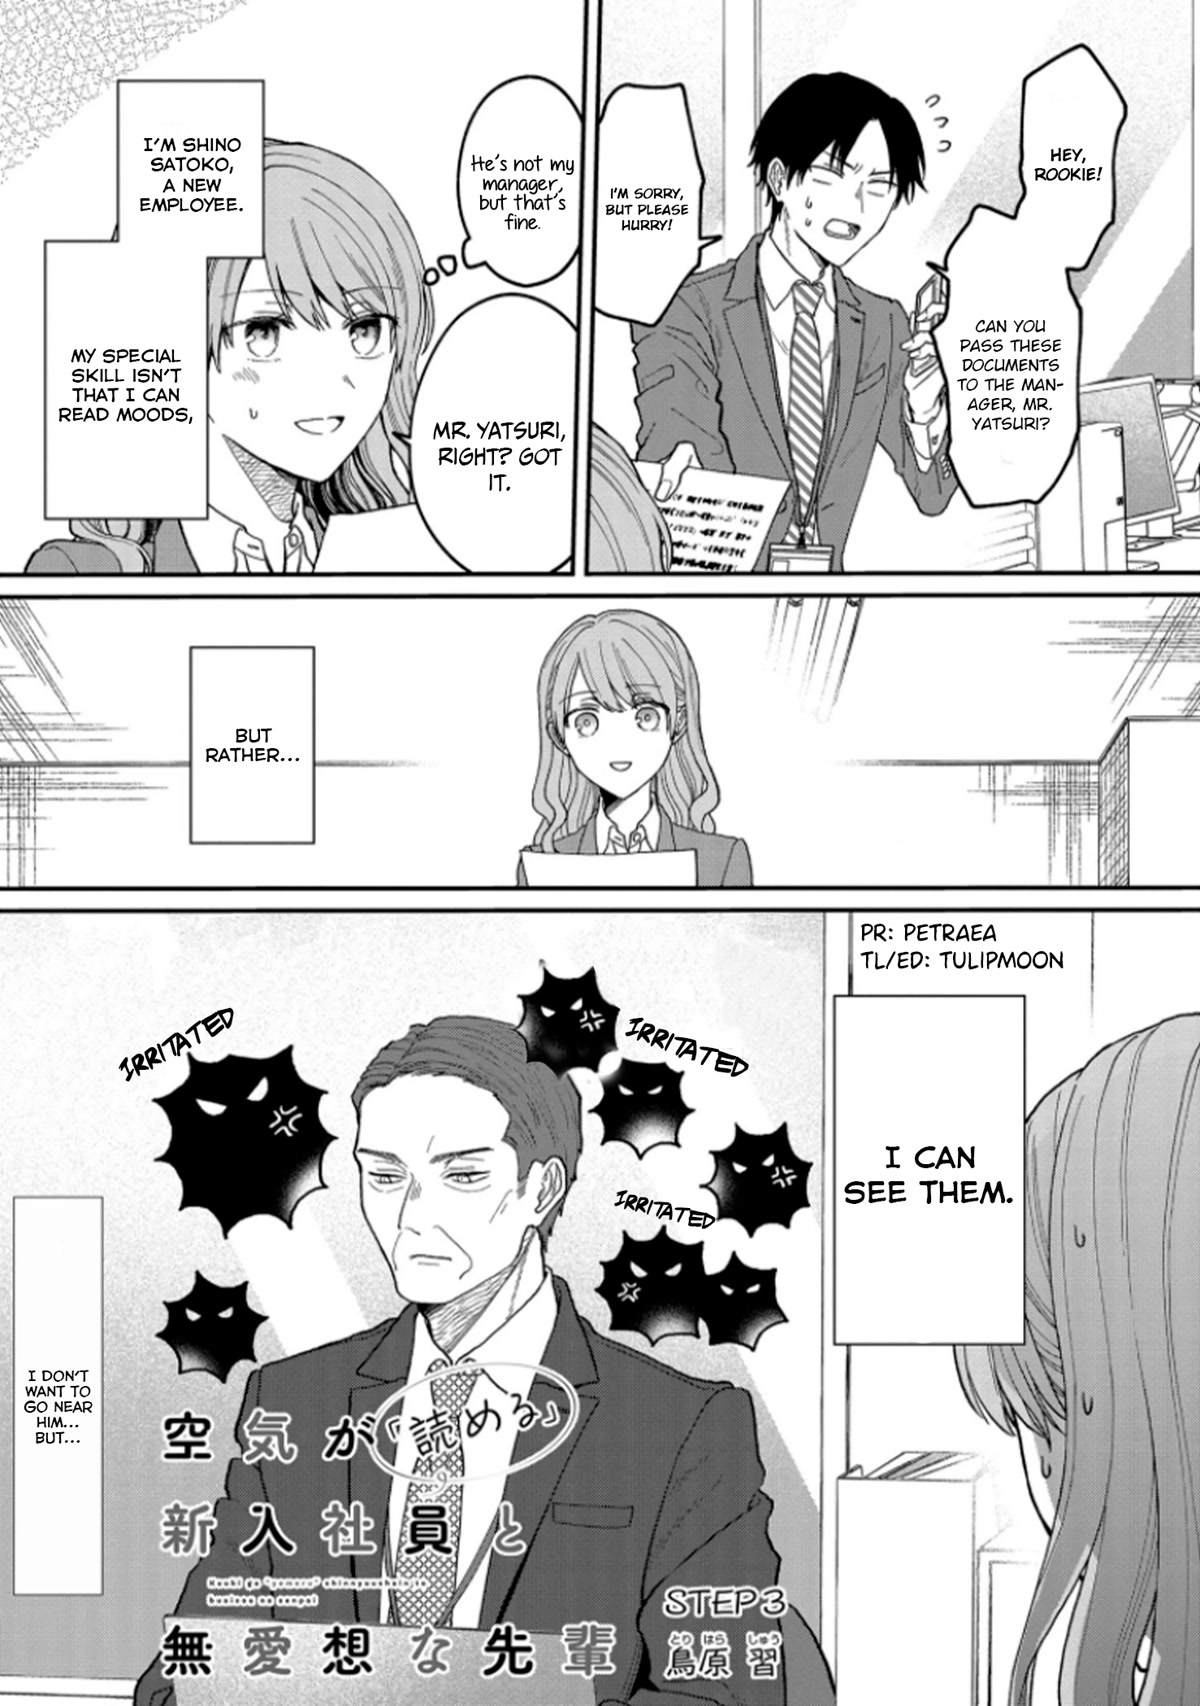 The New-Hire Who Could "Read" Emotions and the Unsociable Senpai - chapter 3 - #1